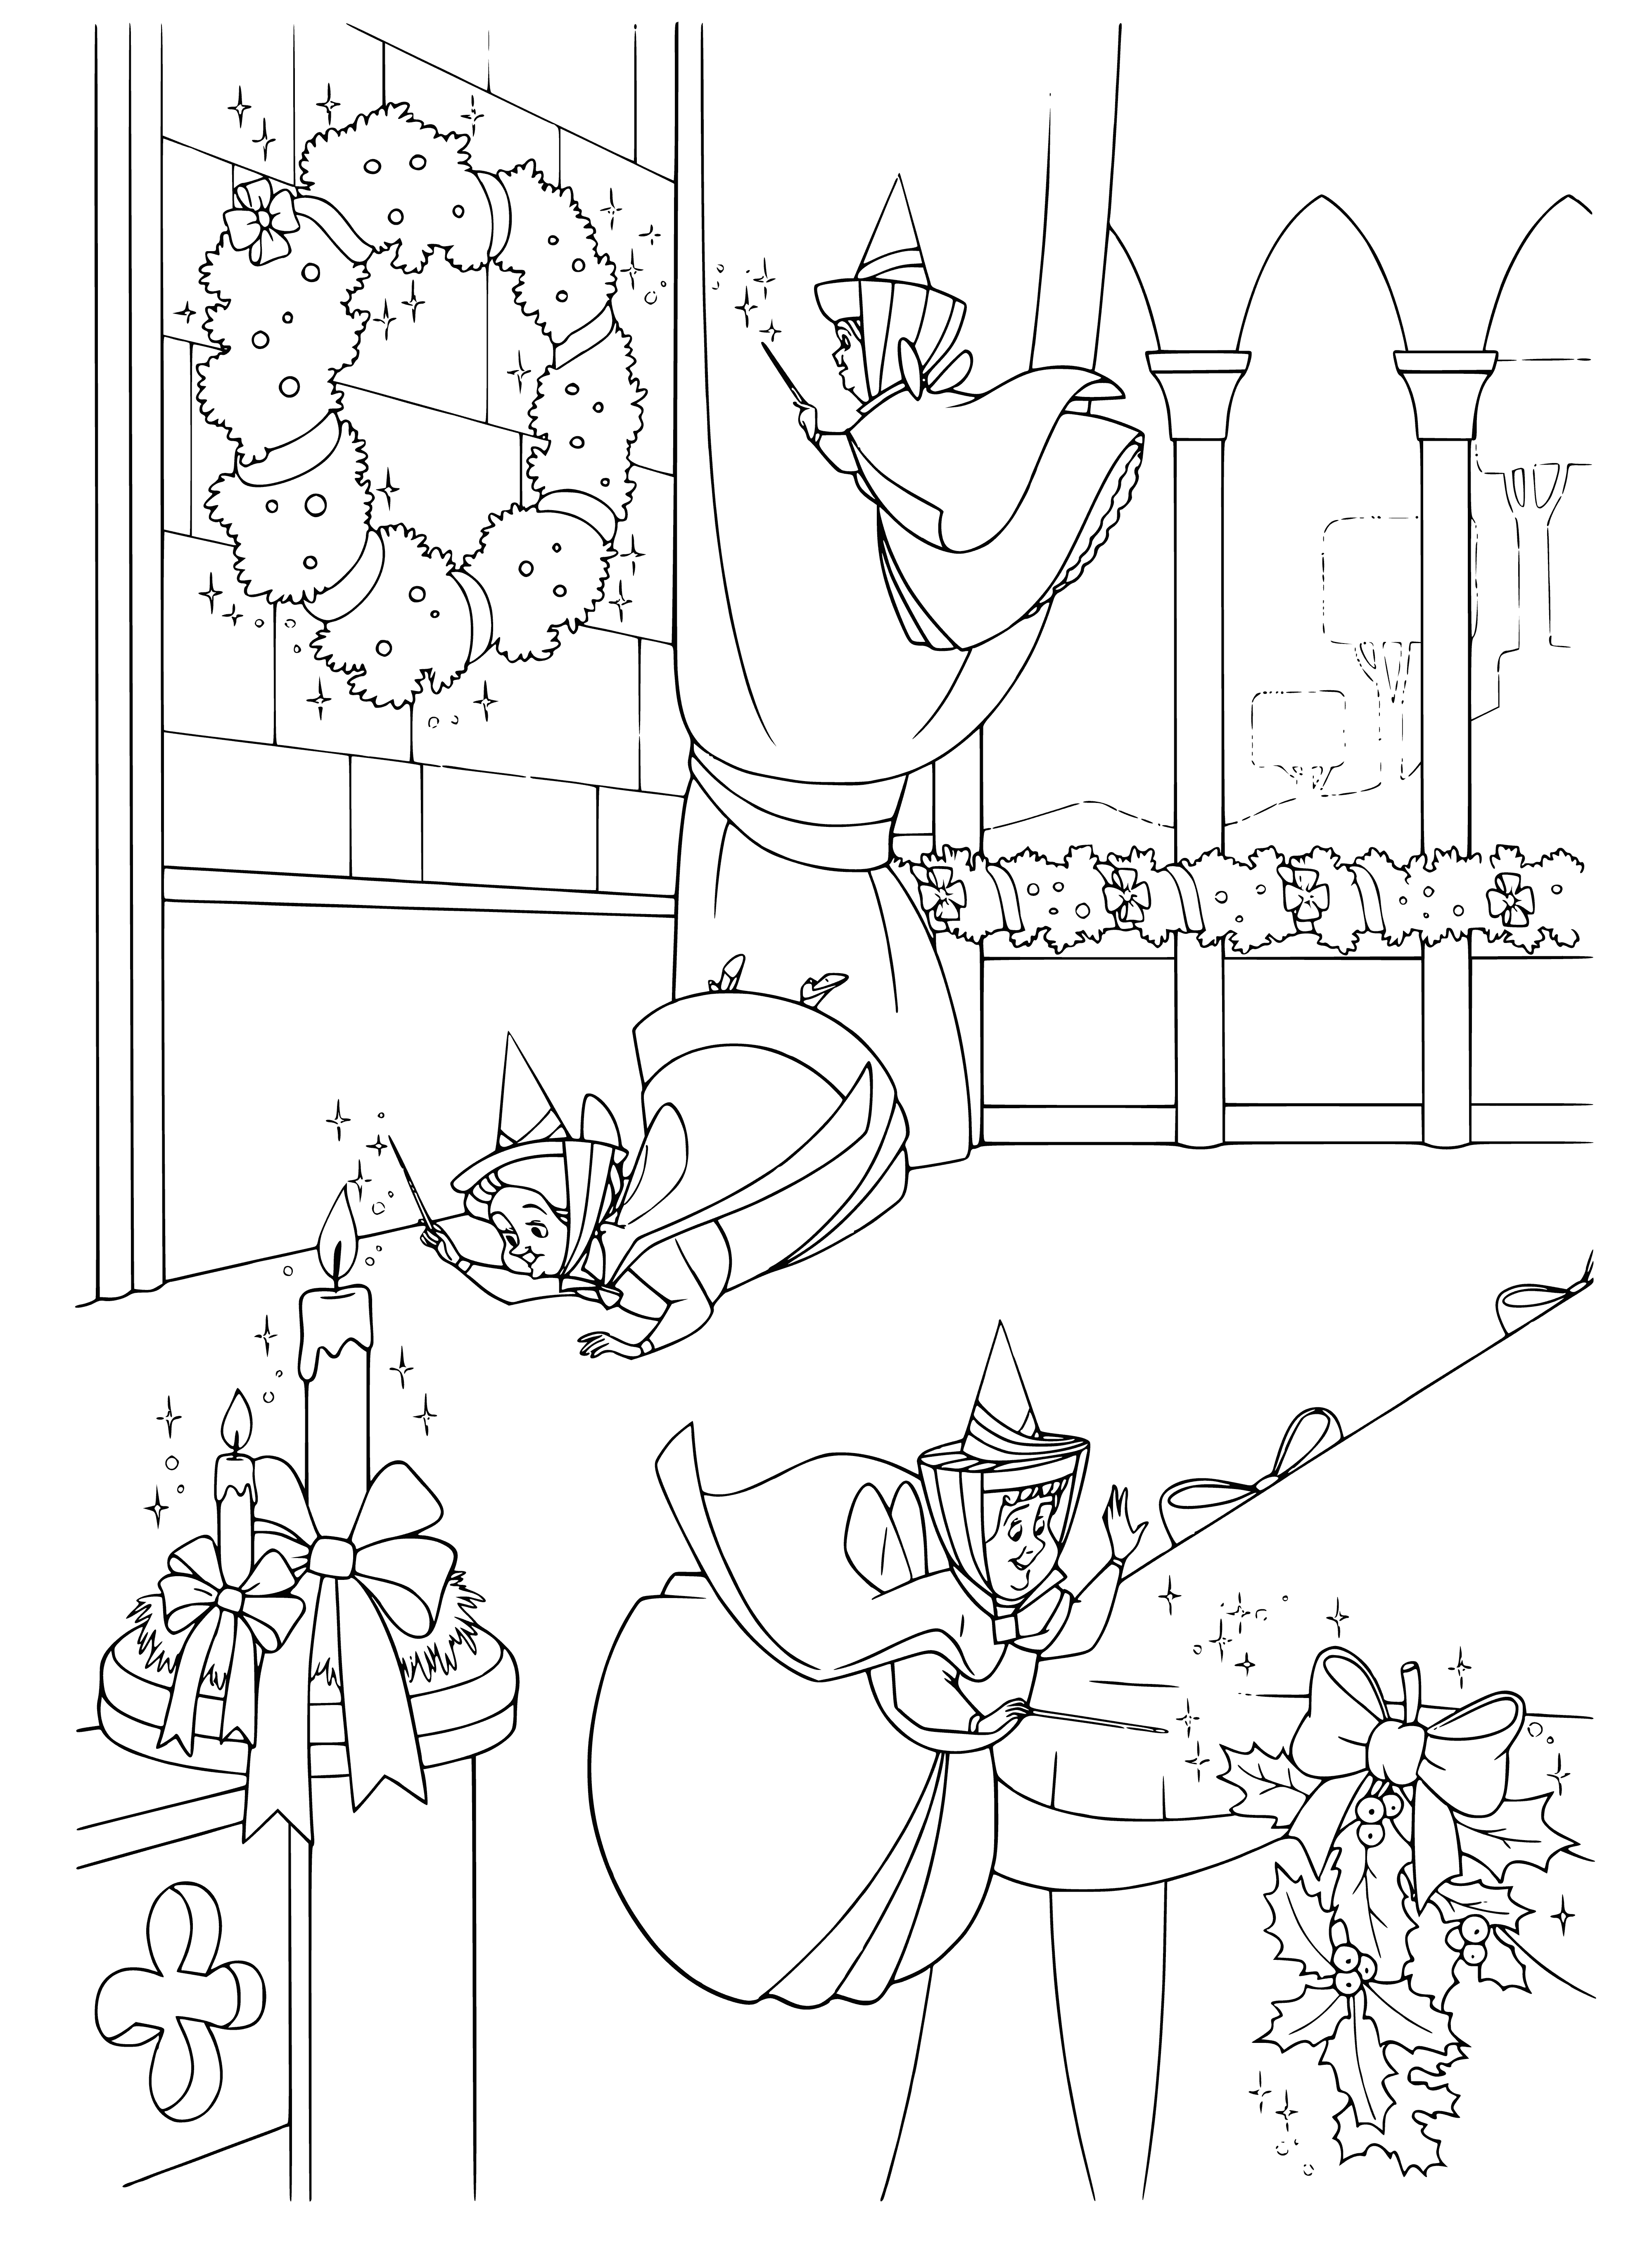 coloring page: -> Fairies decorating castle for New Year w/ banners, garlands, balloons; Fairy Queen joined by subjects in excited anticipation for year ahead.